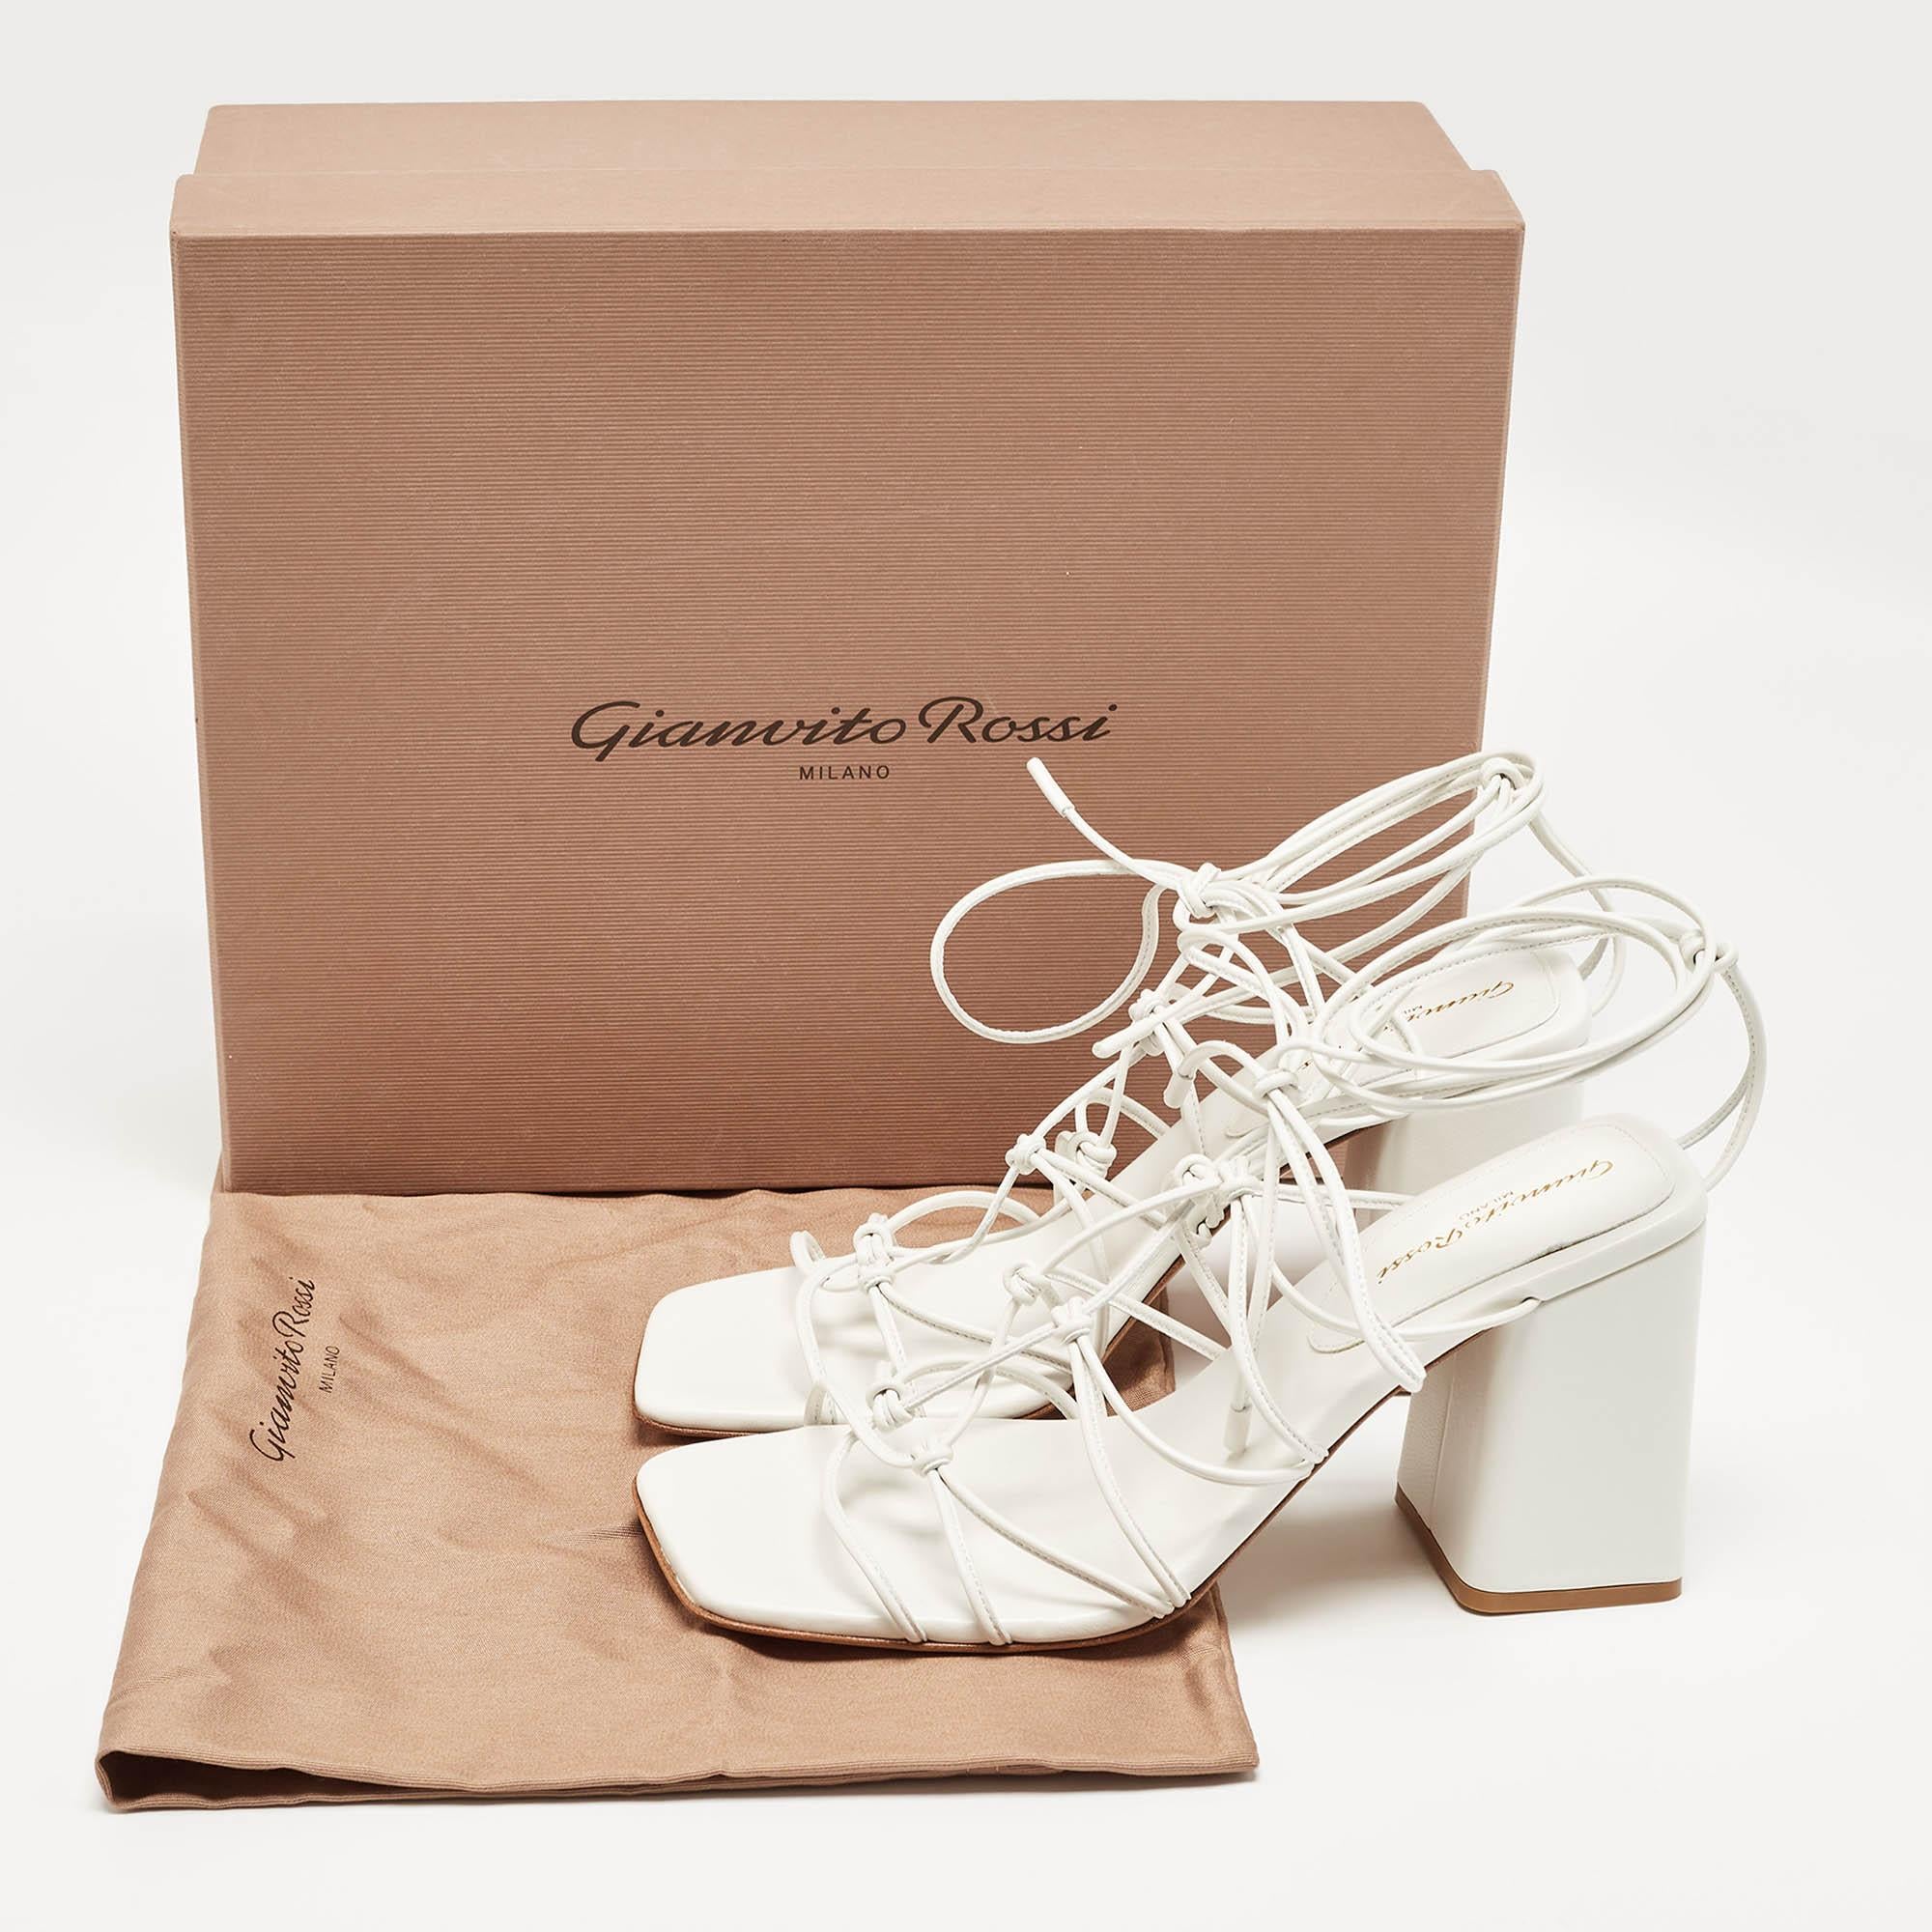 Gianvito Rossi White Leather Minas Sandals Size 40 For Sale 6